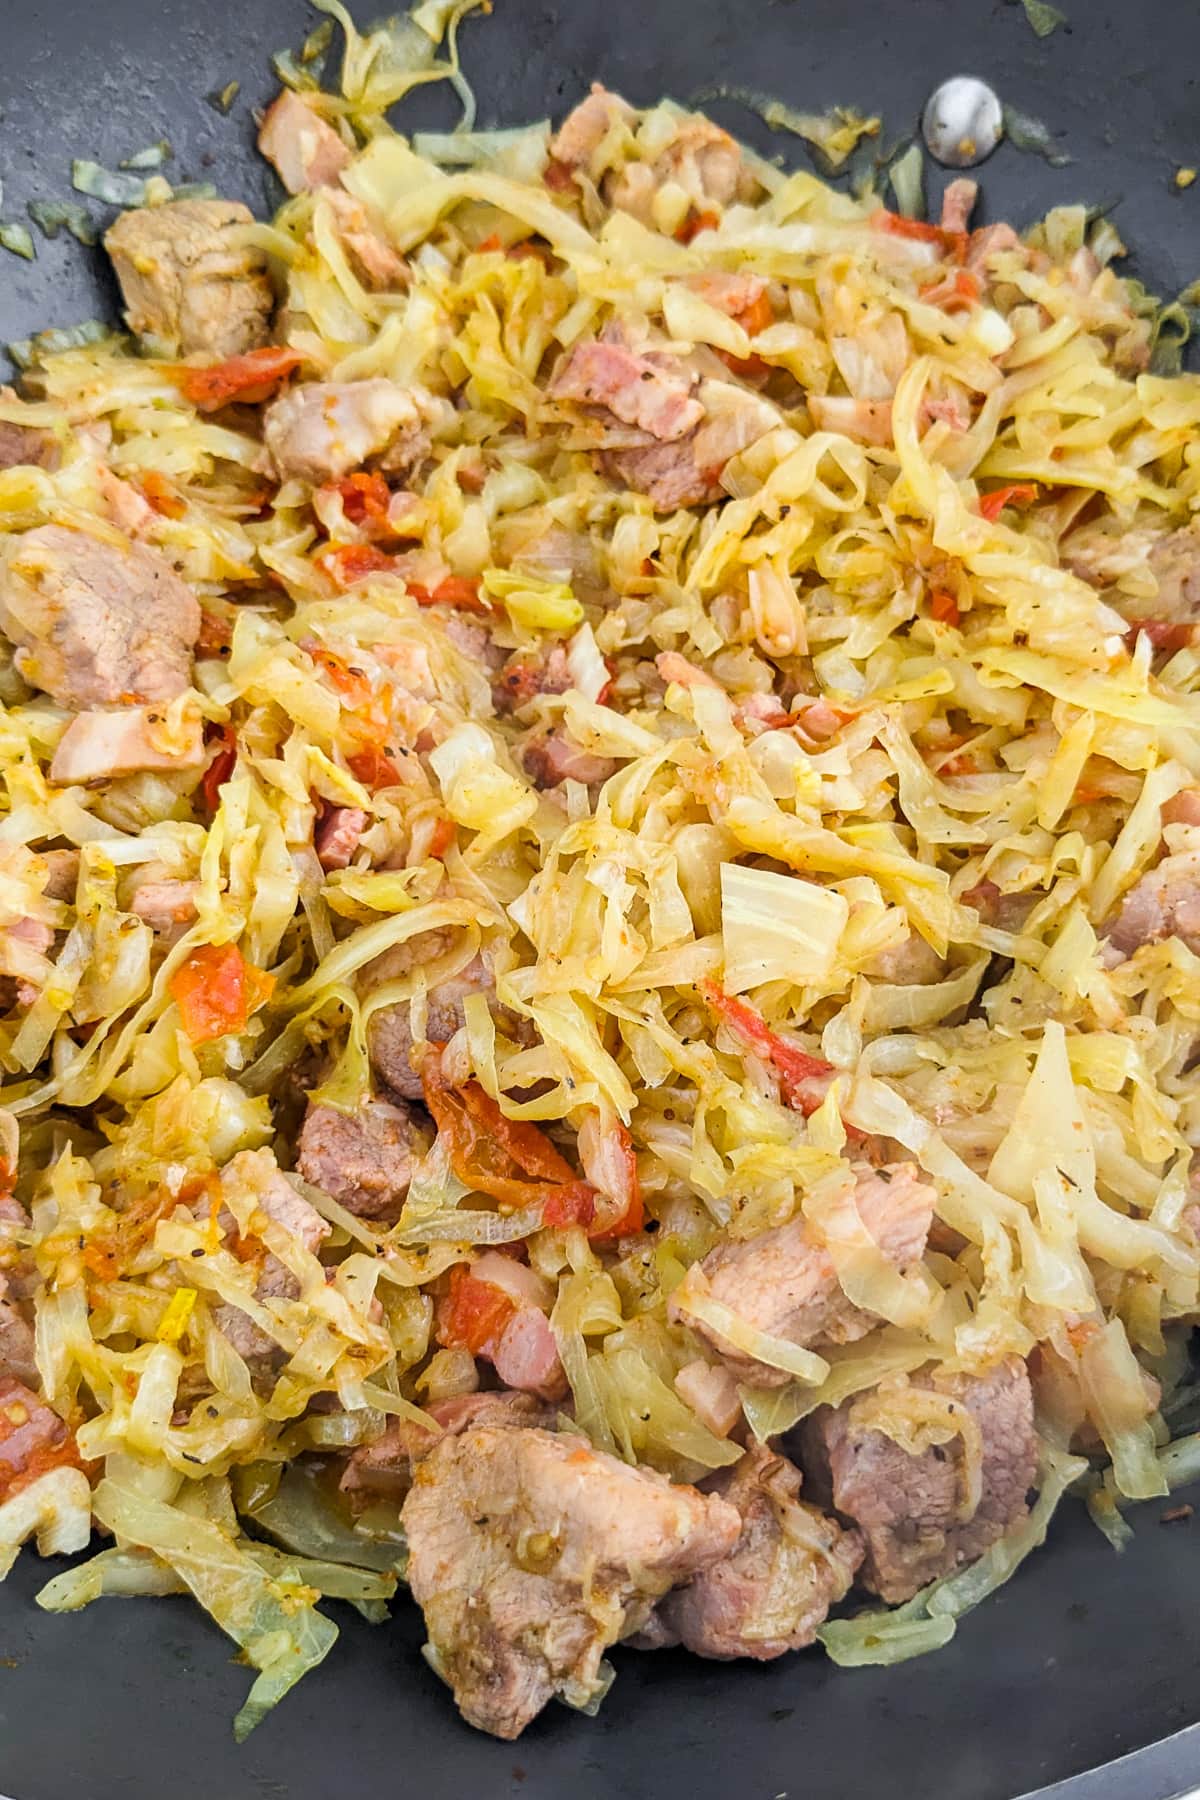 Mixed shredded cabbage with meat, onions and tomatoes.